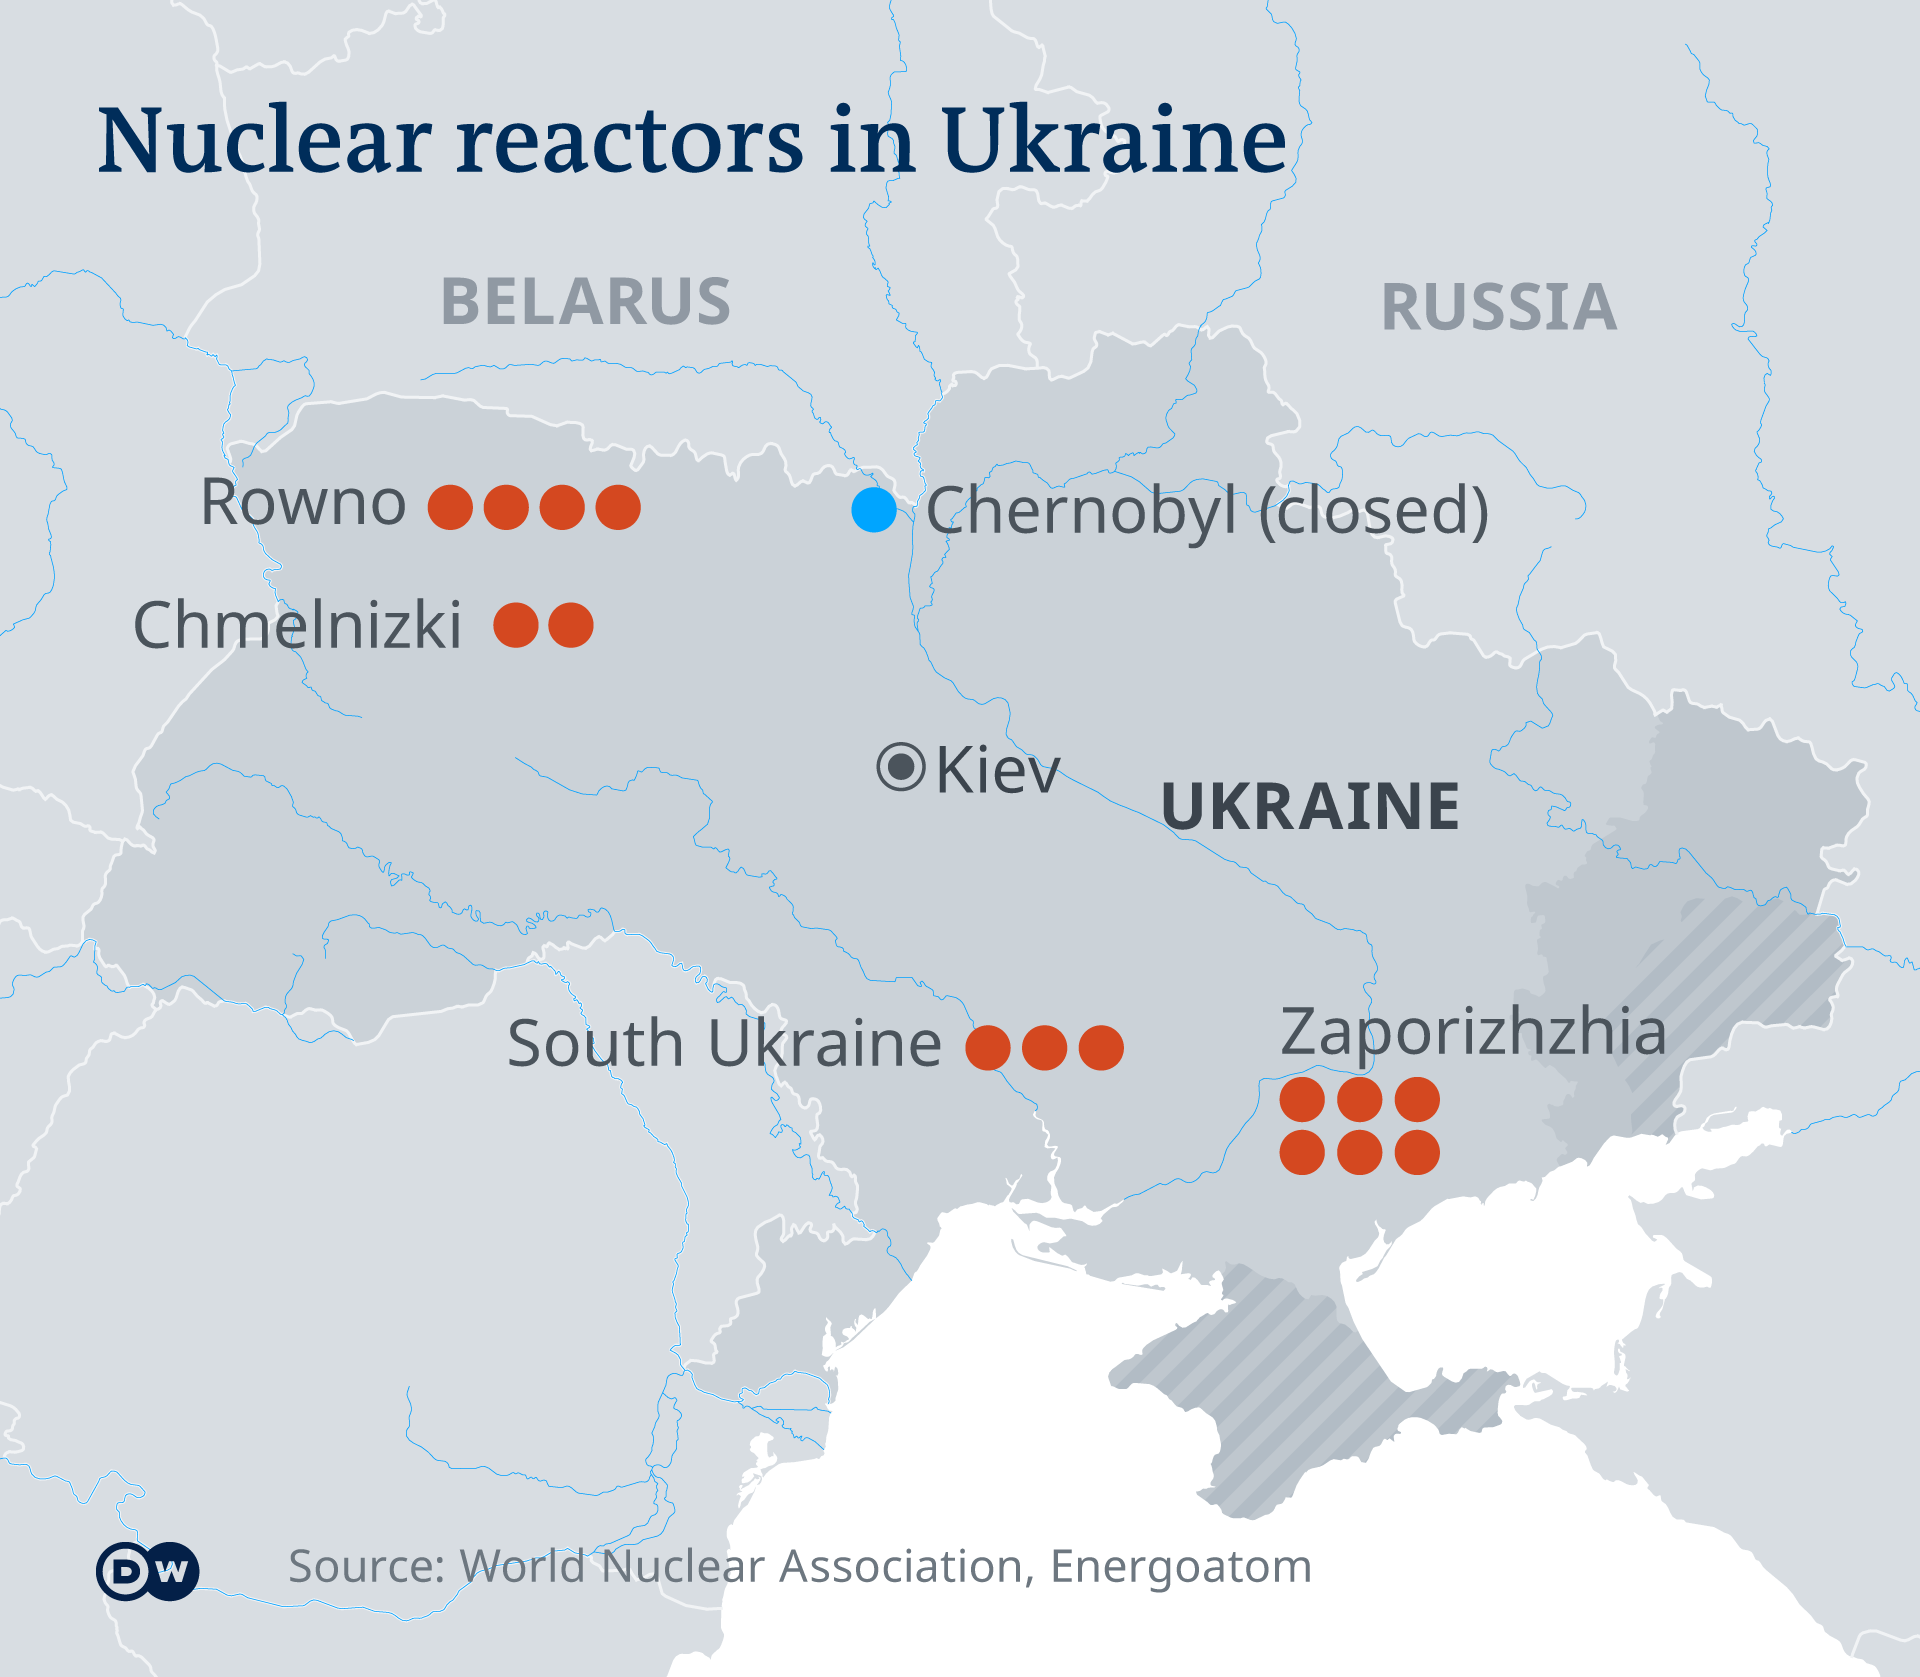 Infographic showing nuclear reactors in Ukraine